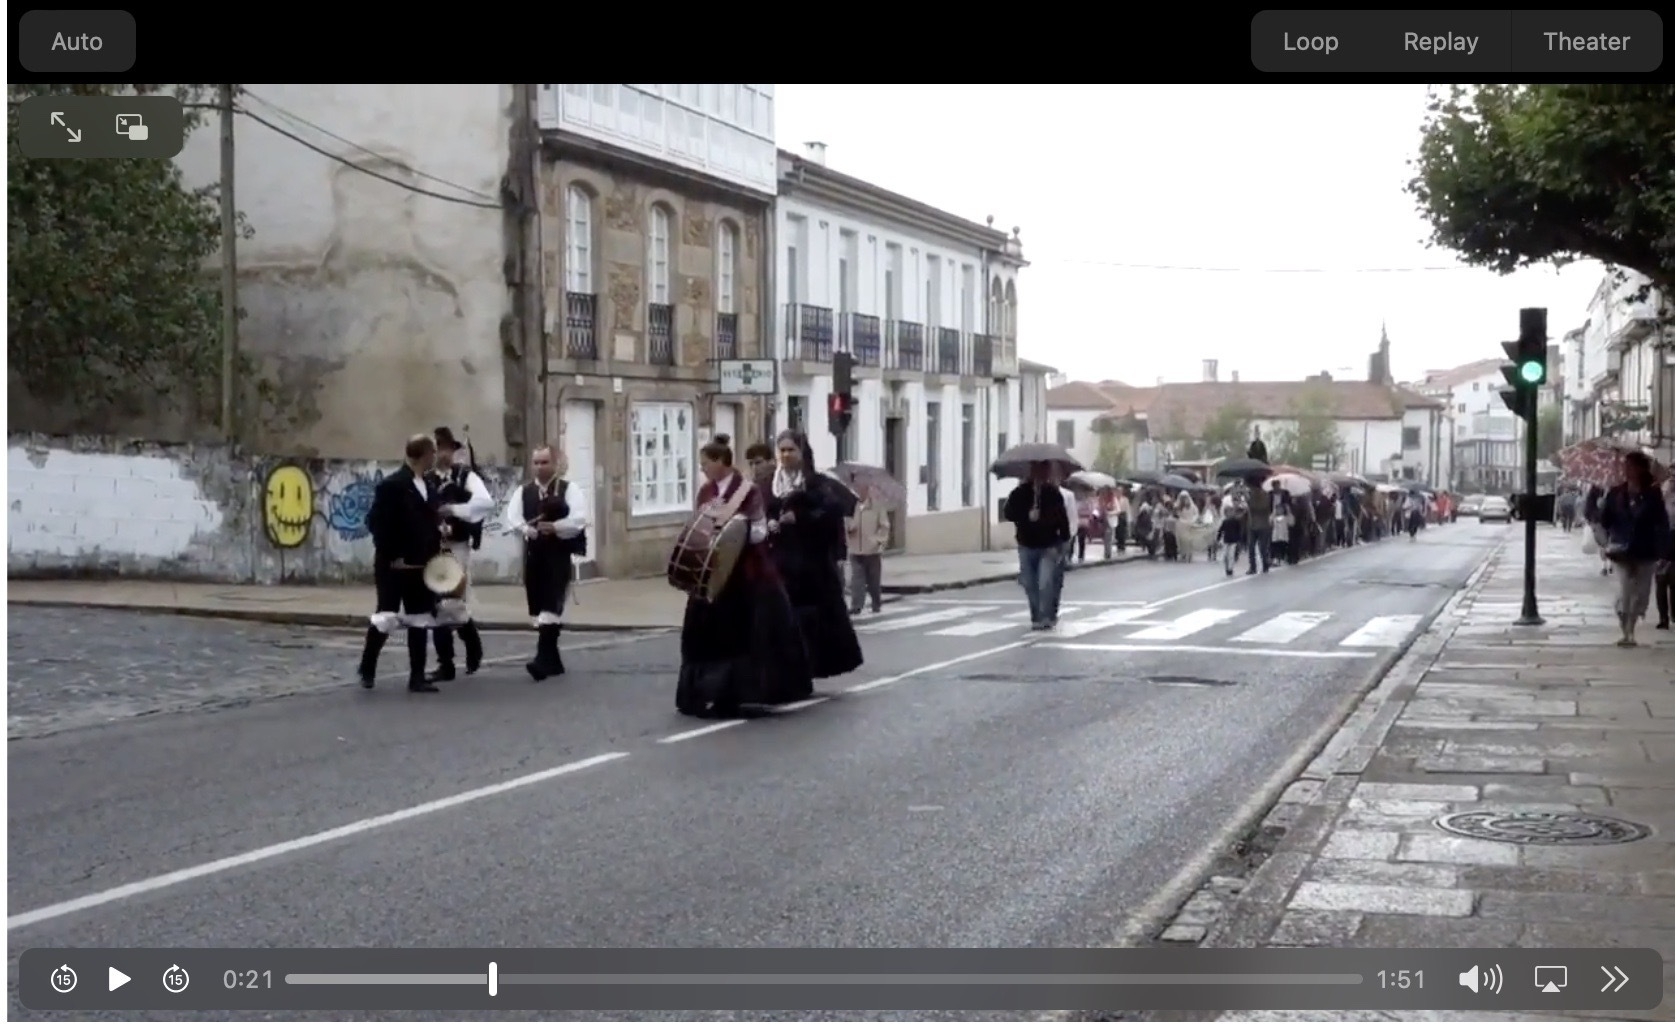 Screenshot from the procession video. 